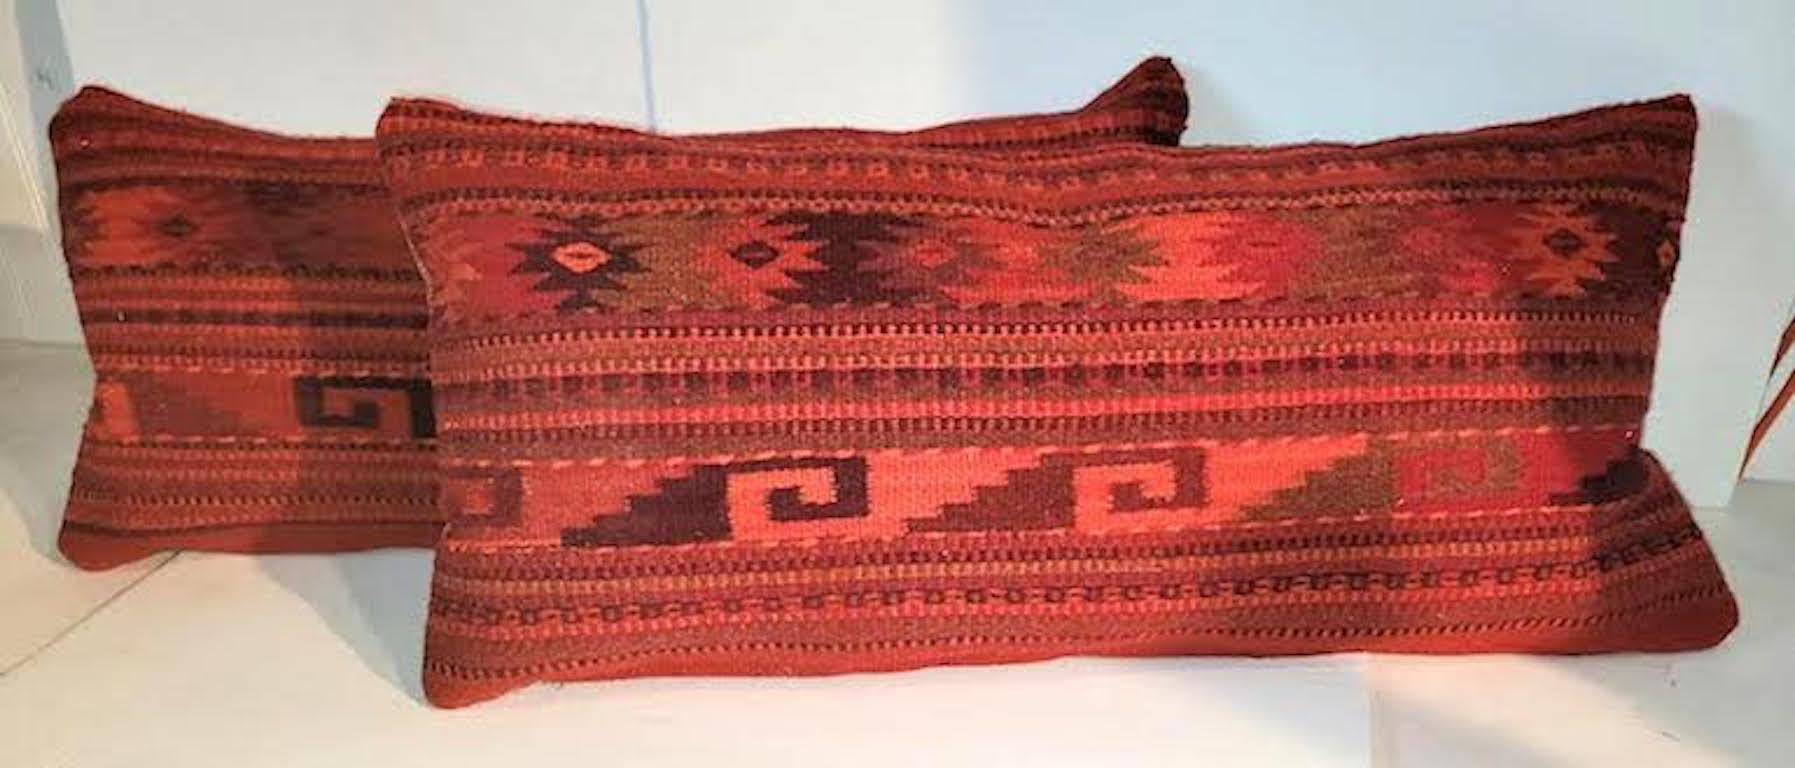 Pair of Custom Made Red Mexican Indian Weaving Pillows. Zippered casing. Featherand Down Insert.